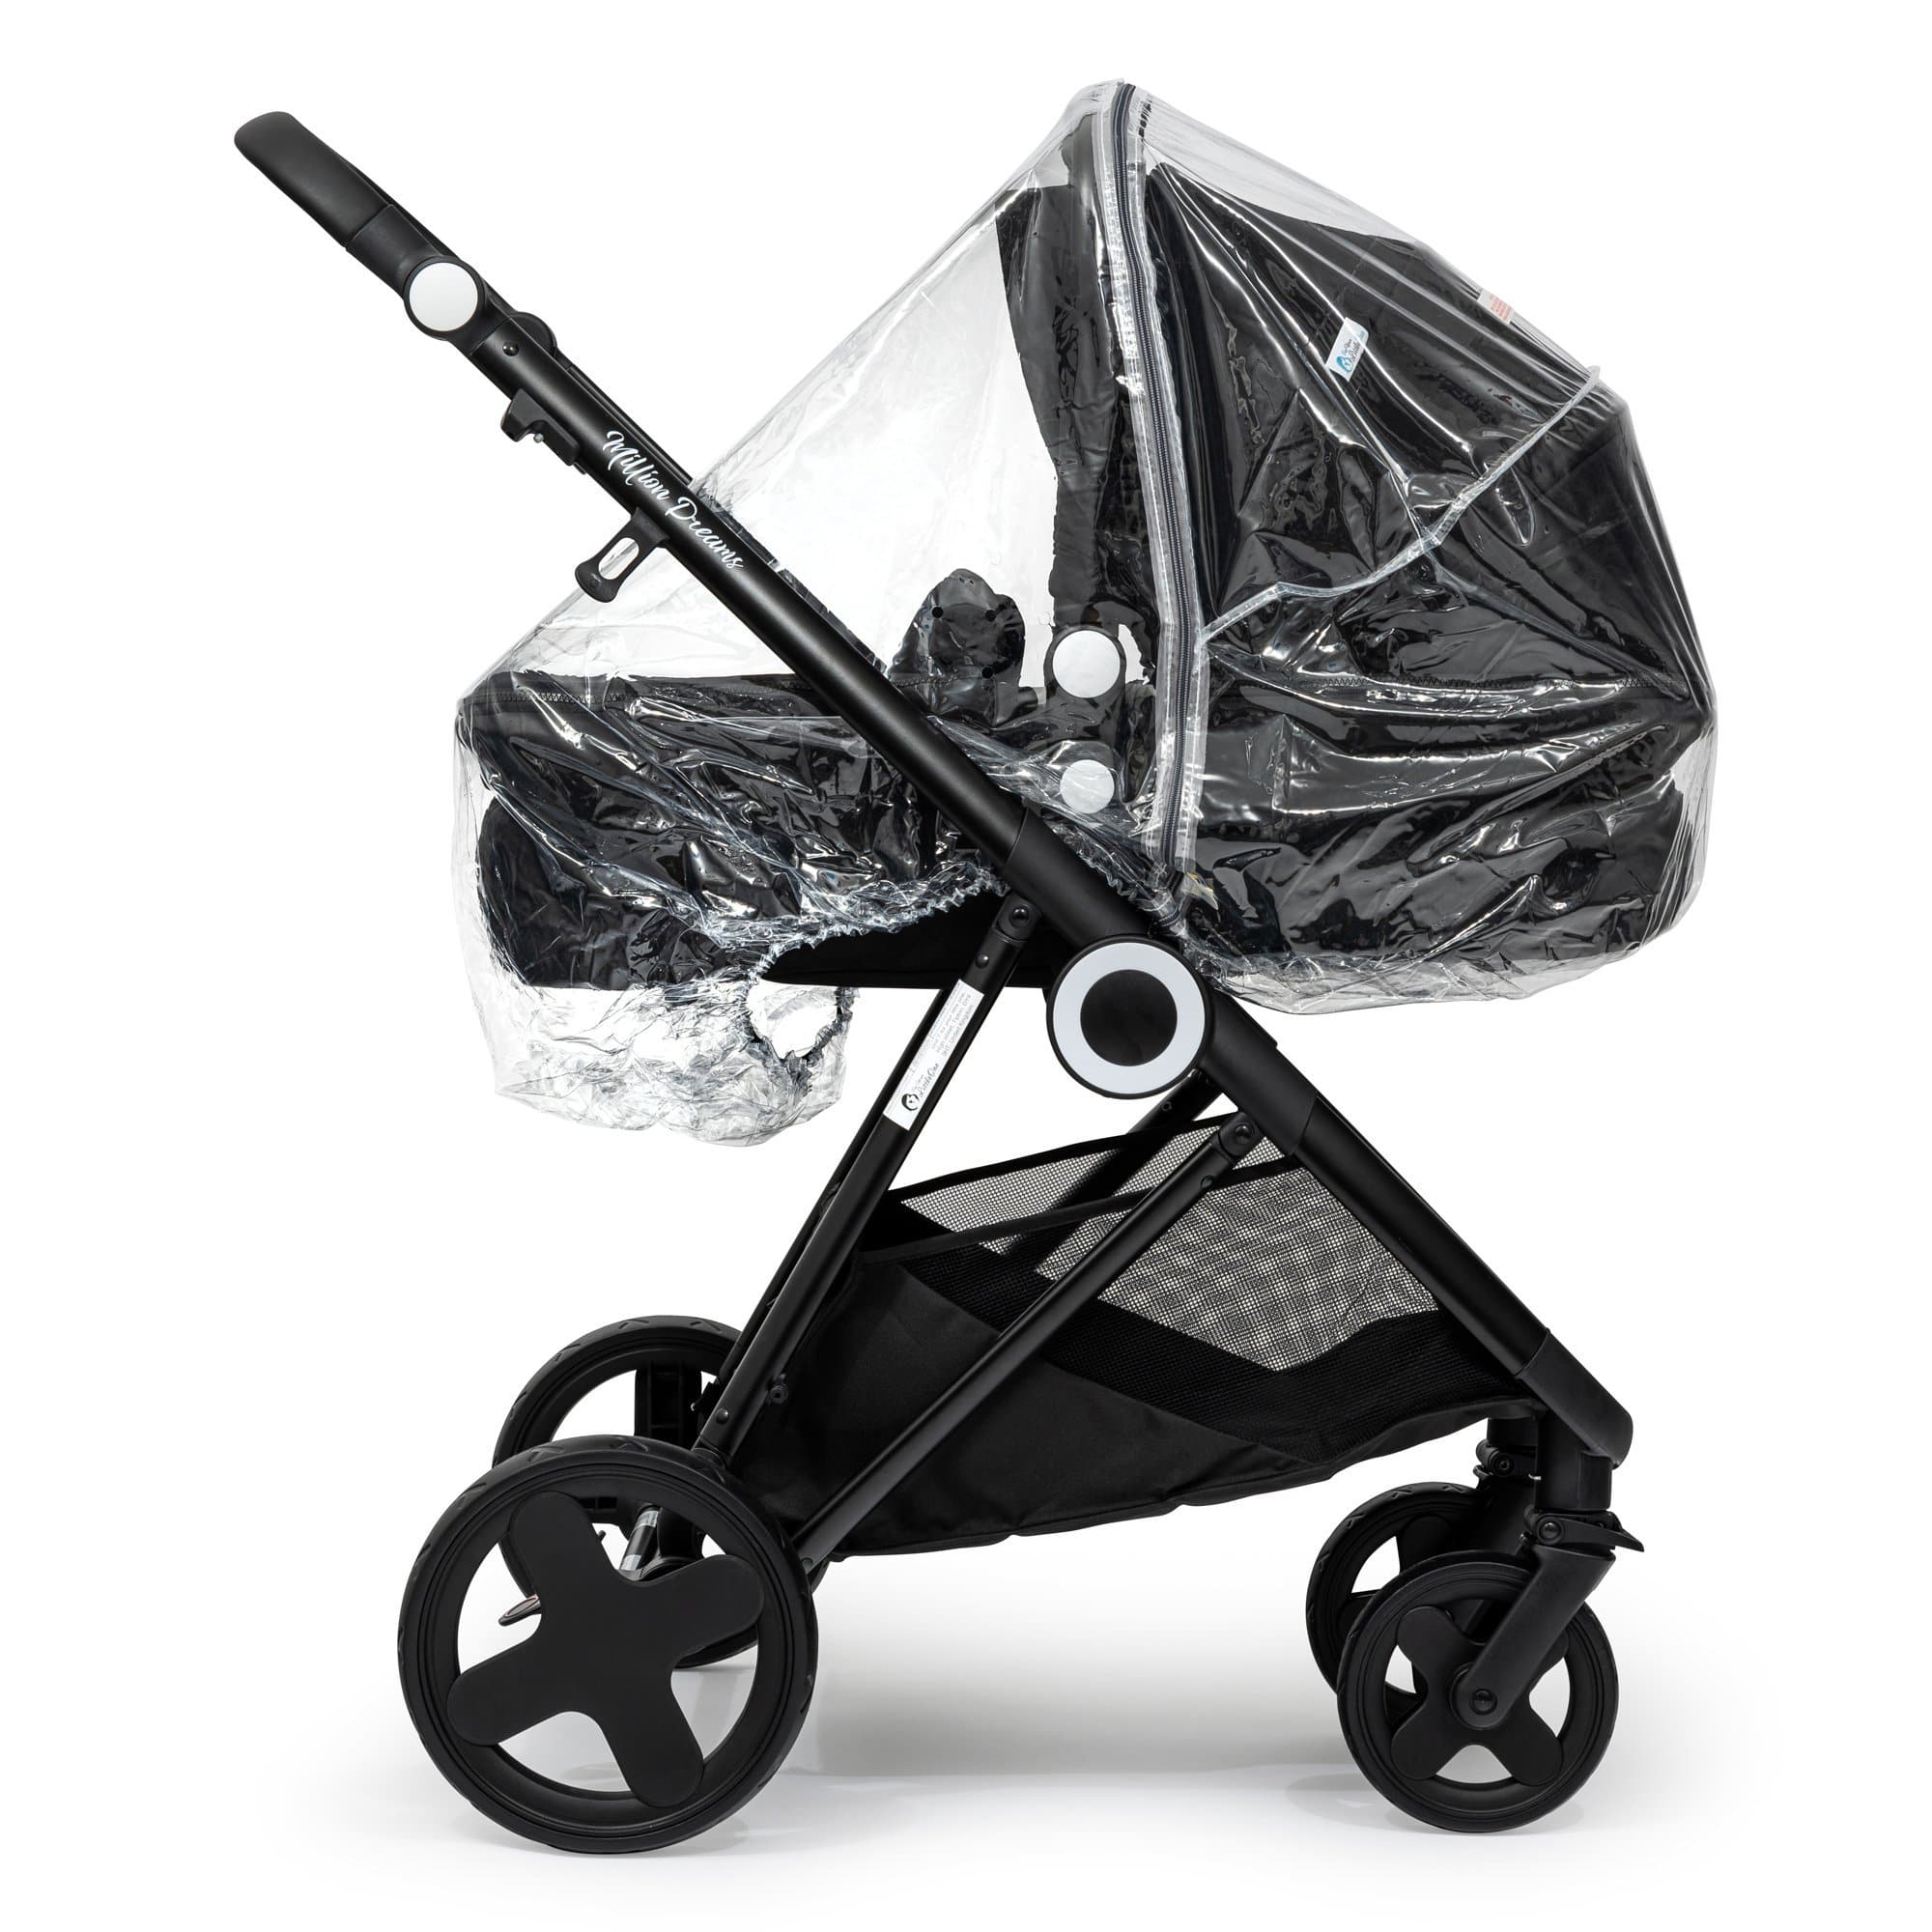 2 in 1 Rain Cover Compatible with Peg Perego - Fits All Models - For Your Little One